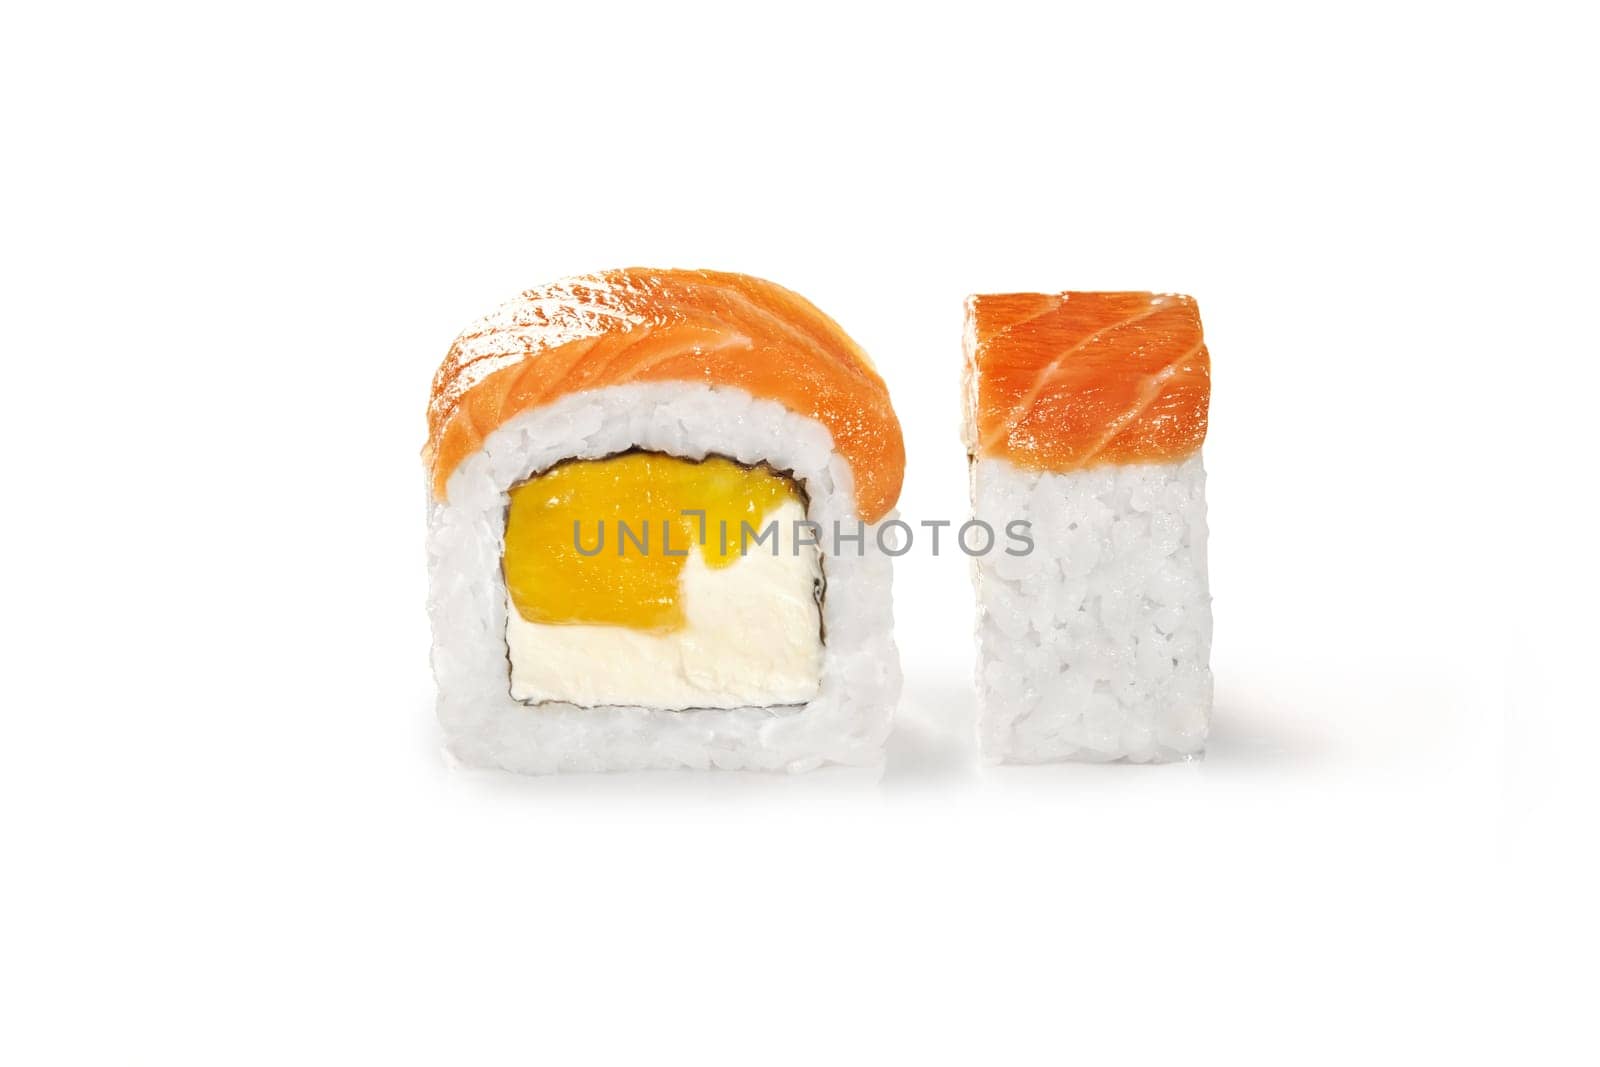 Elegant sushi roll topped with fresh salmon, with sweet mango and creamy cheese filling, detailed closeup view isolated on white background